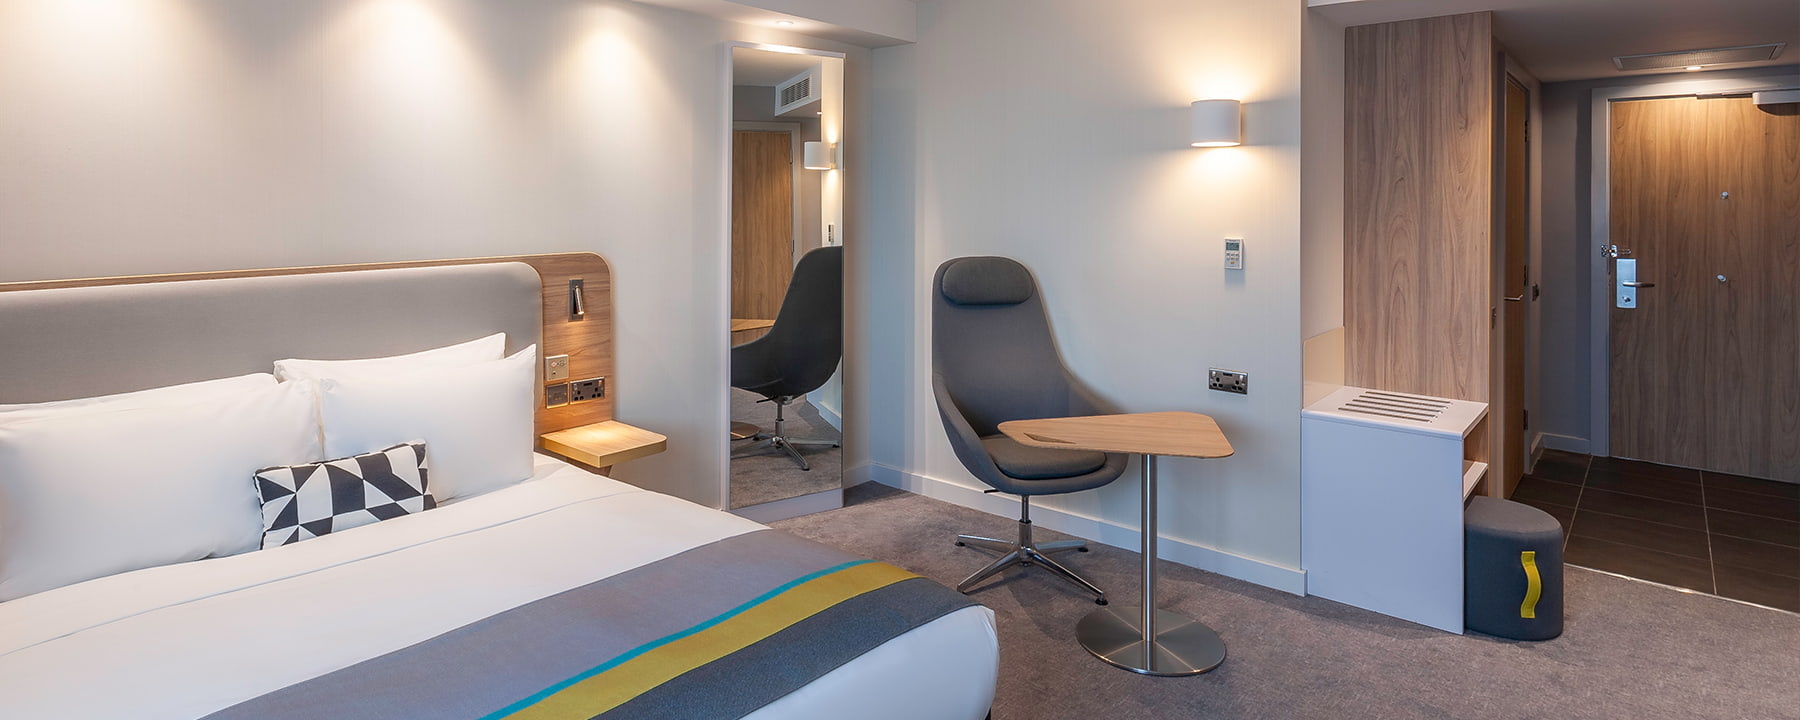 Dublin Airport Hotel Accessible Bedroom